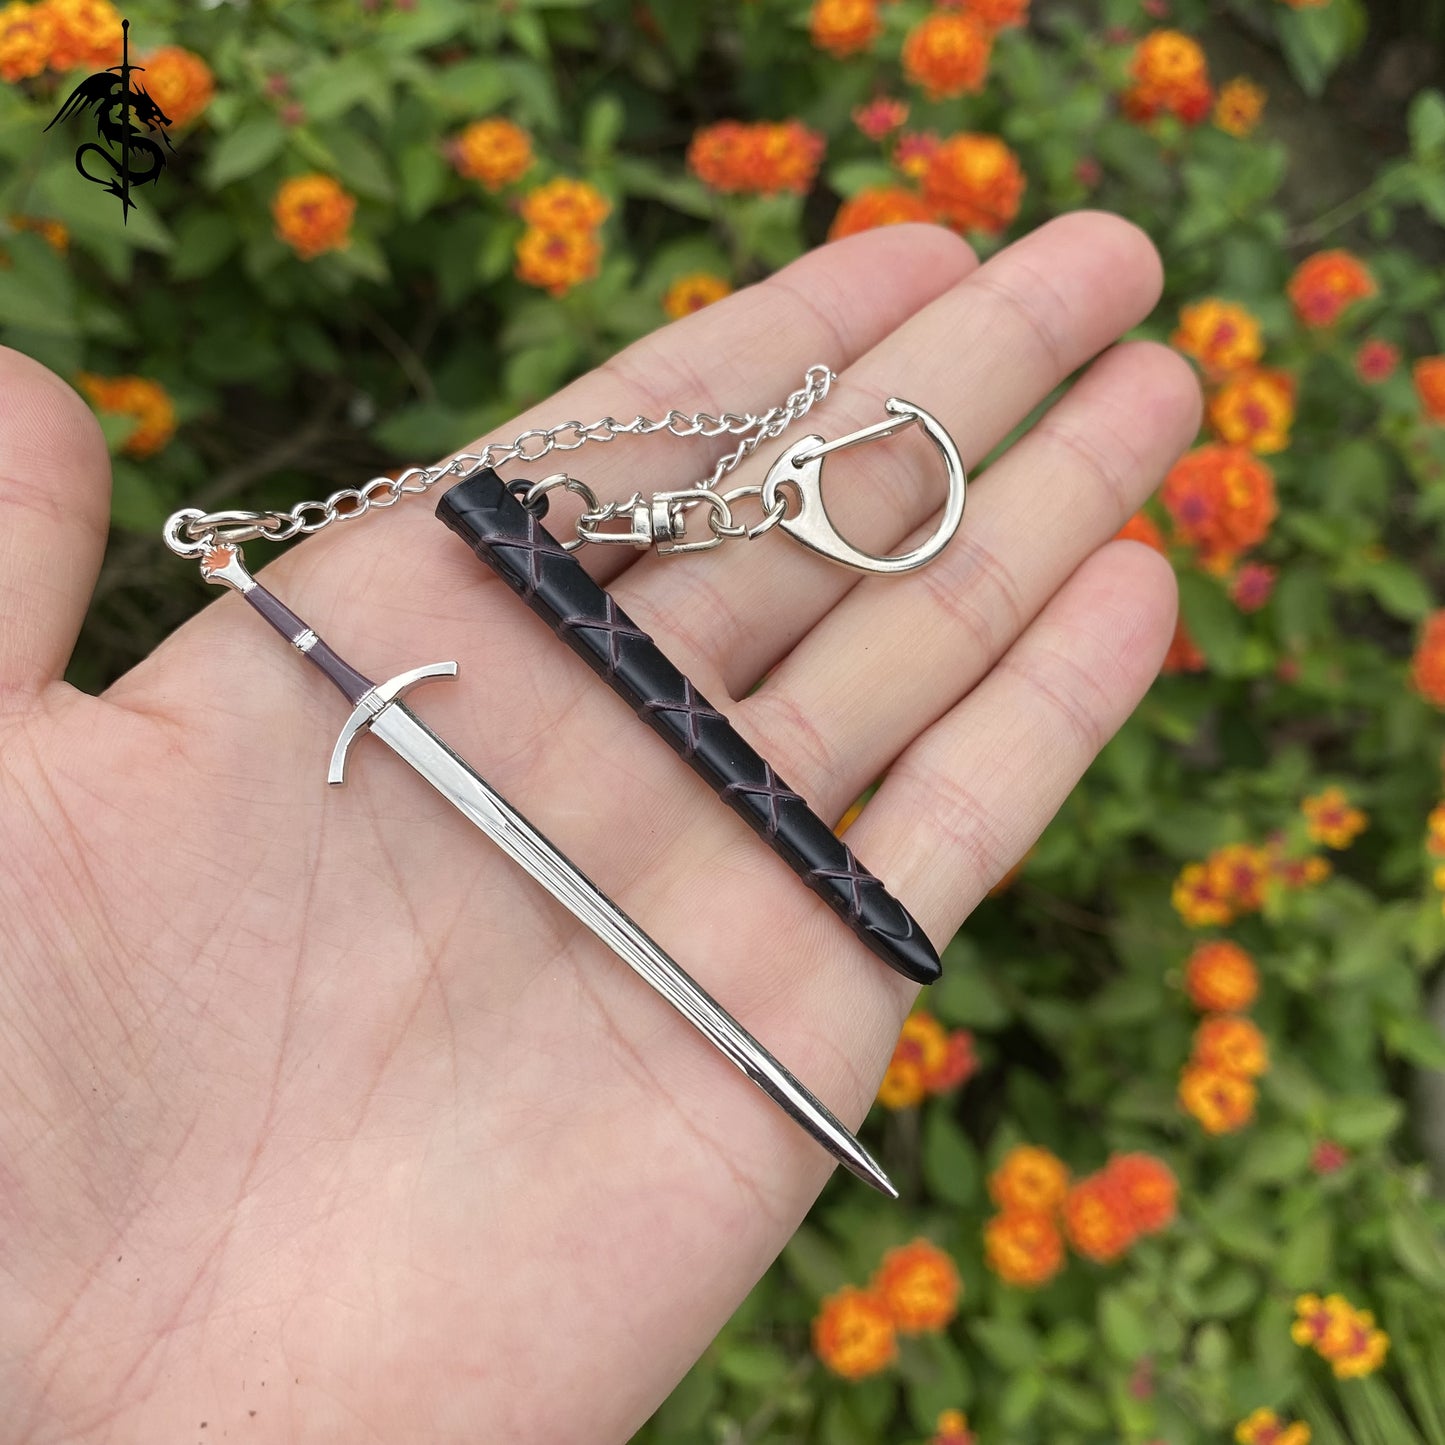 Middle Age Weapon Sword Keychain 5 In 1 Pack